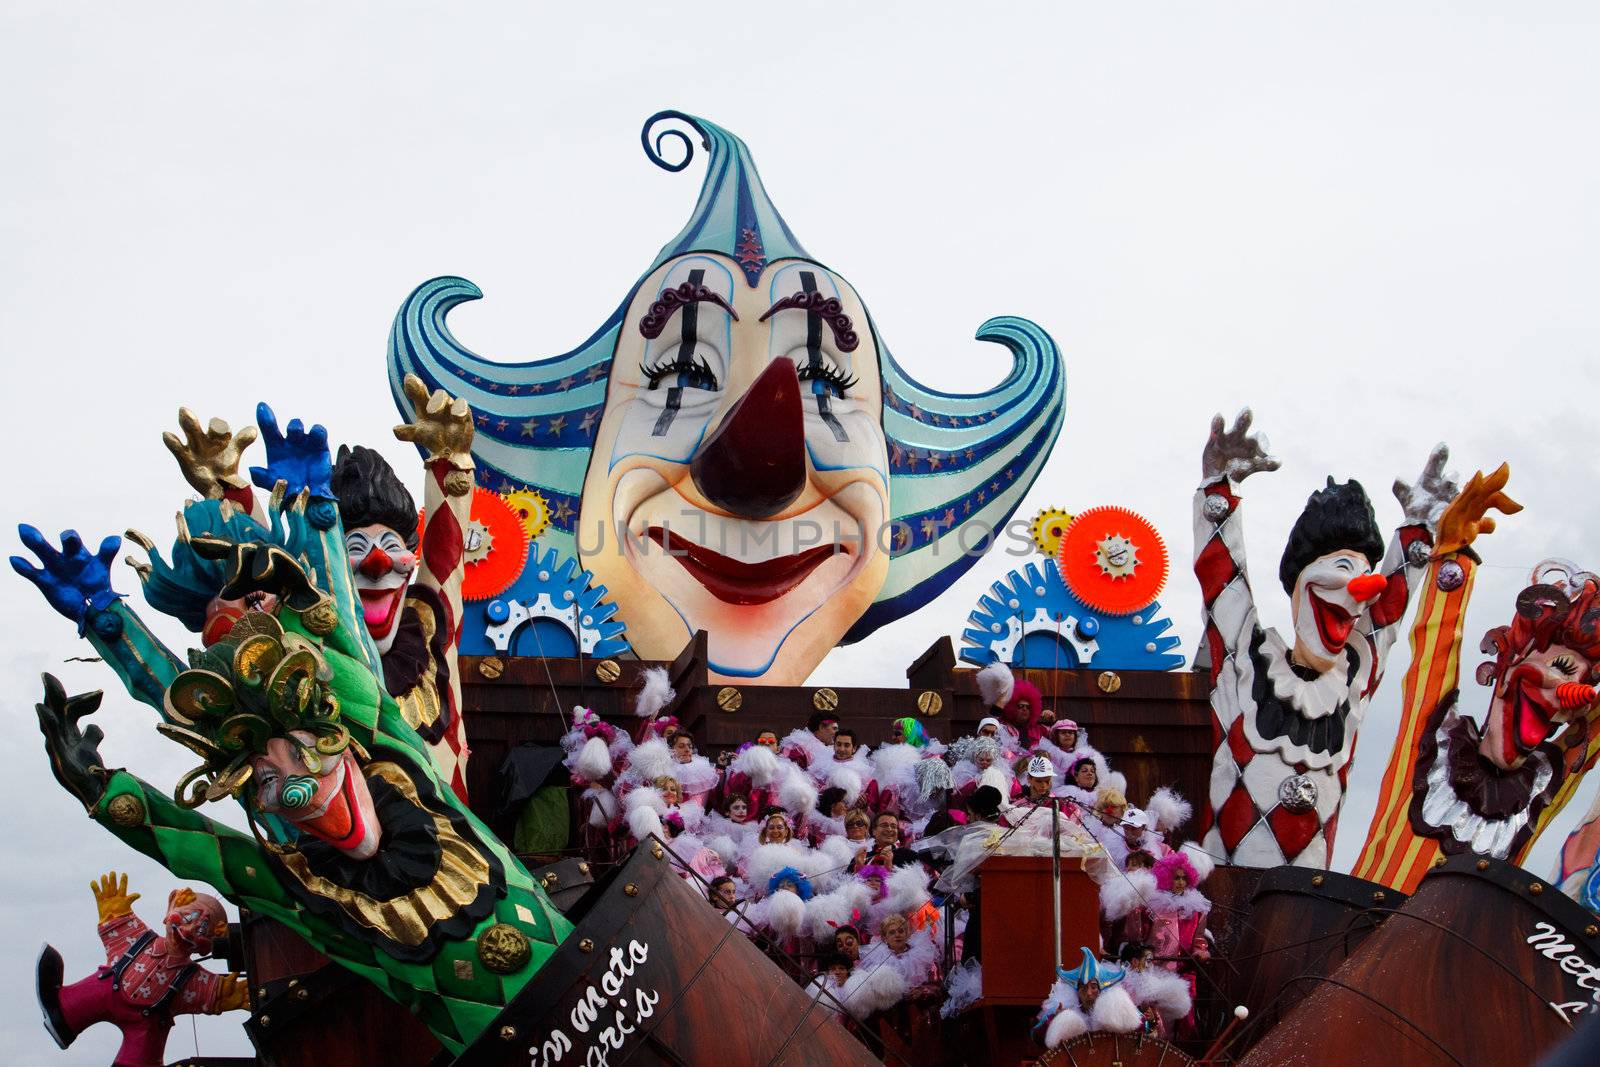 Carnival Float by FedericoPhoto